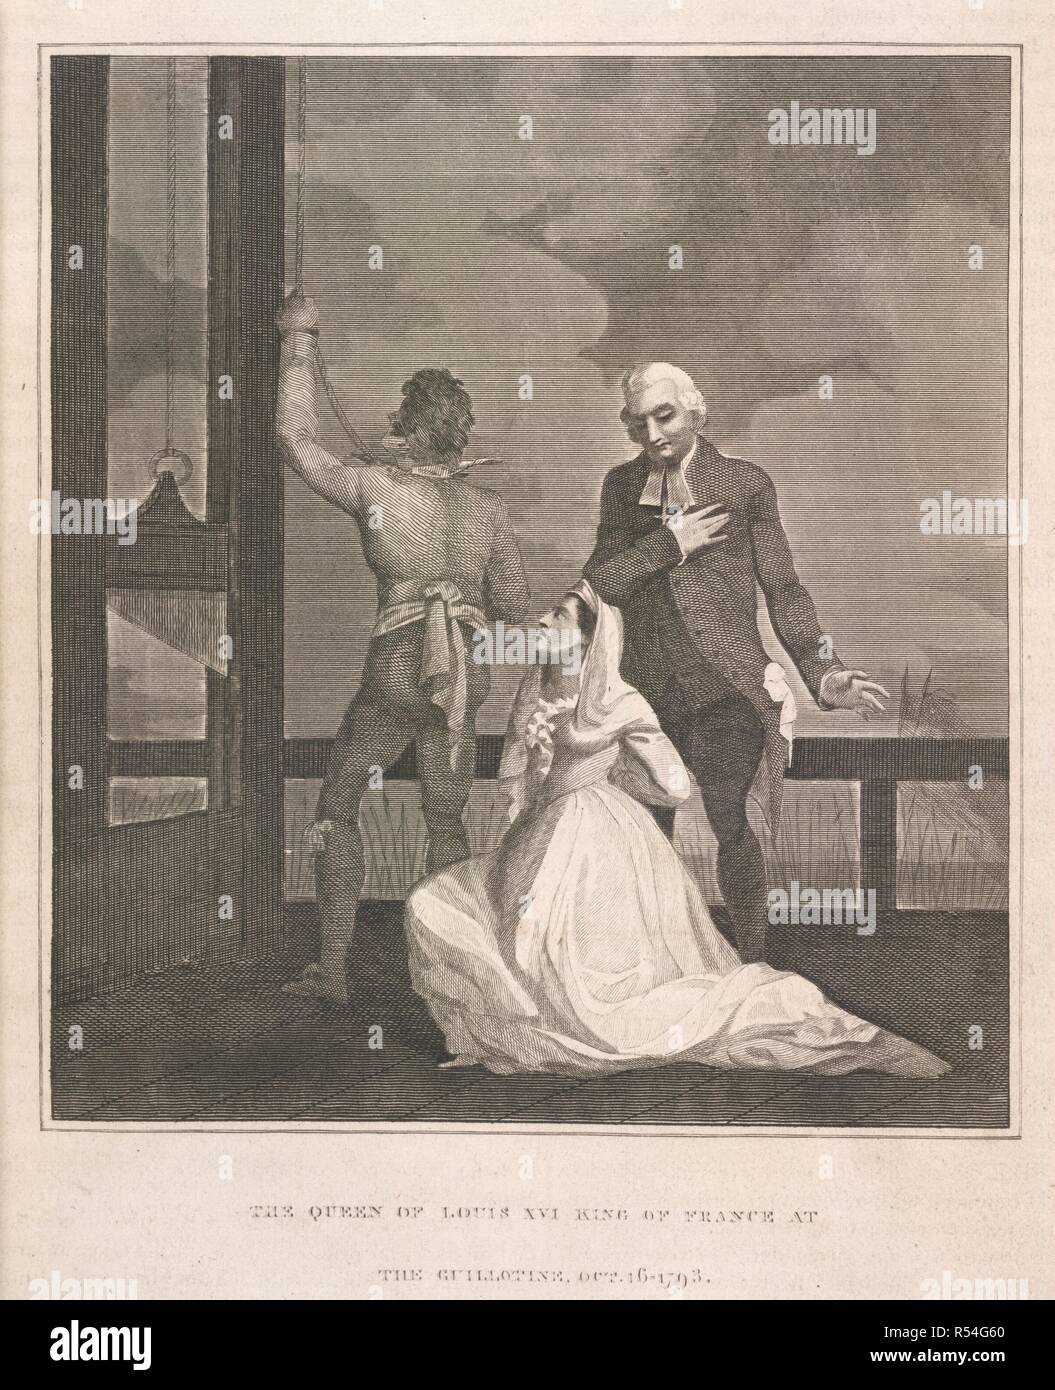 The Queen of Louis XVI. History of the French Revolution, and of the wars. T. Kelly: London, 1820-22. The Queen (Marie Antoinette) of Louis XVI King of France at the guillotine, Oct 16, 1793.  Image taken from History of the French Revolution, and of the wars produced by that event ....  Originally published/produced in T. Kelly: London, 1820-22. . Source: 9952.f.1 volume 1, opposite 123. Language: English. Stock Photo